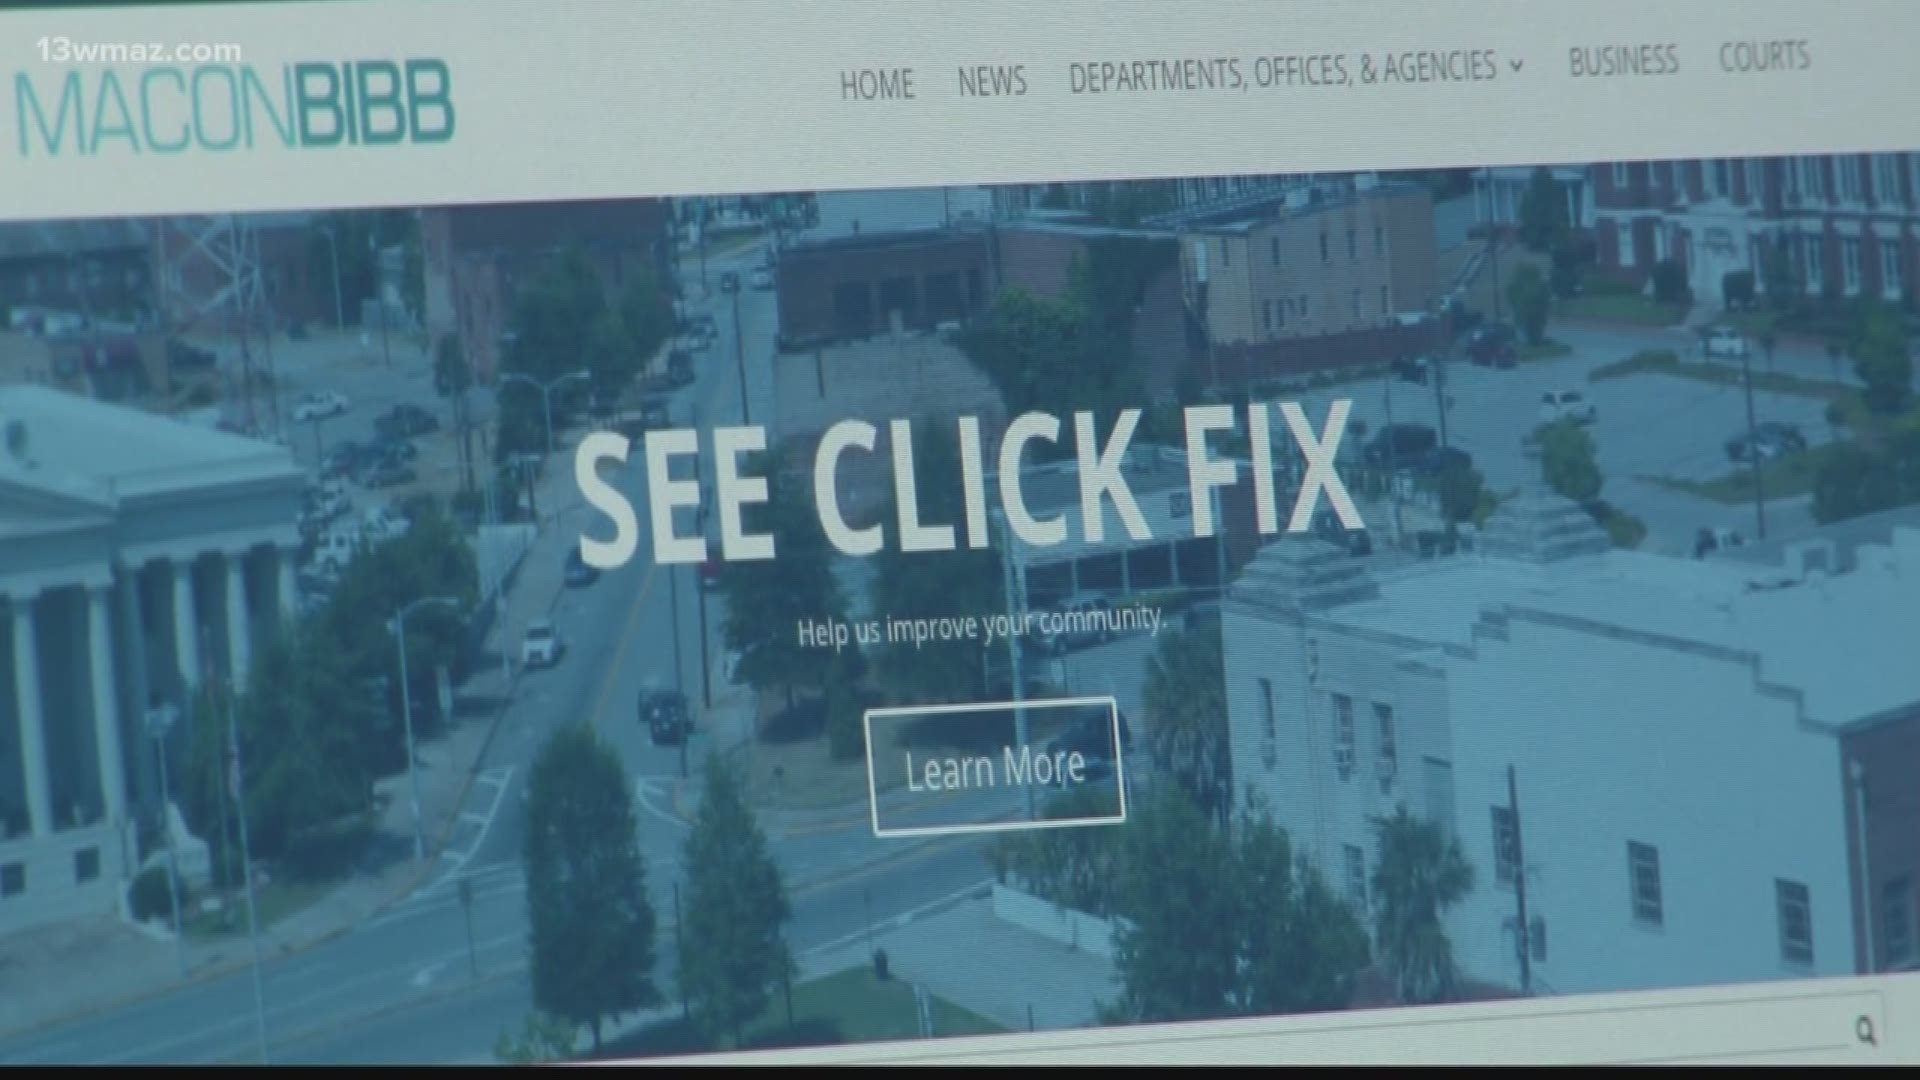 For damaged sidewalks and potholes, Macon-Bibb county's online system is the best way to go for a quick fix.